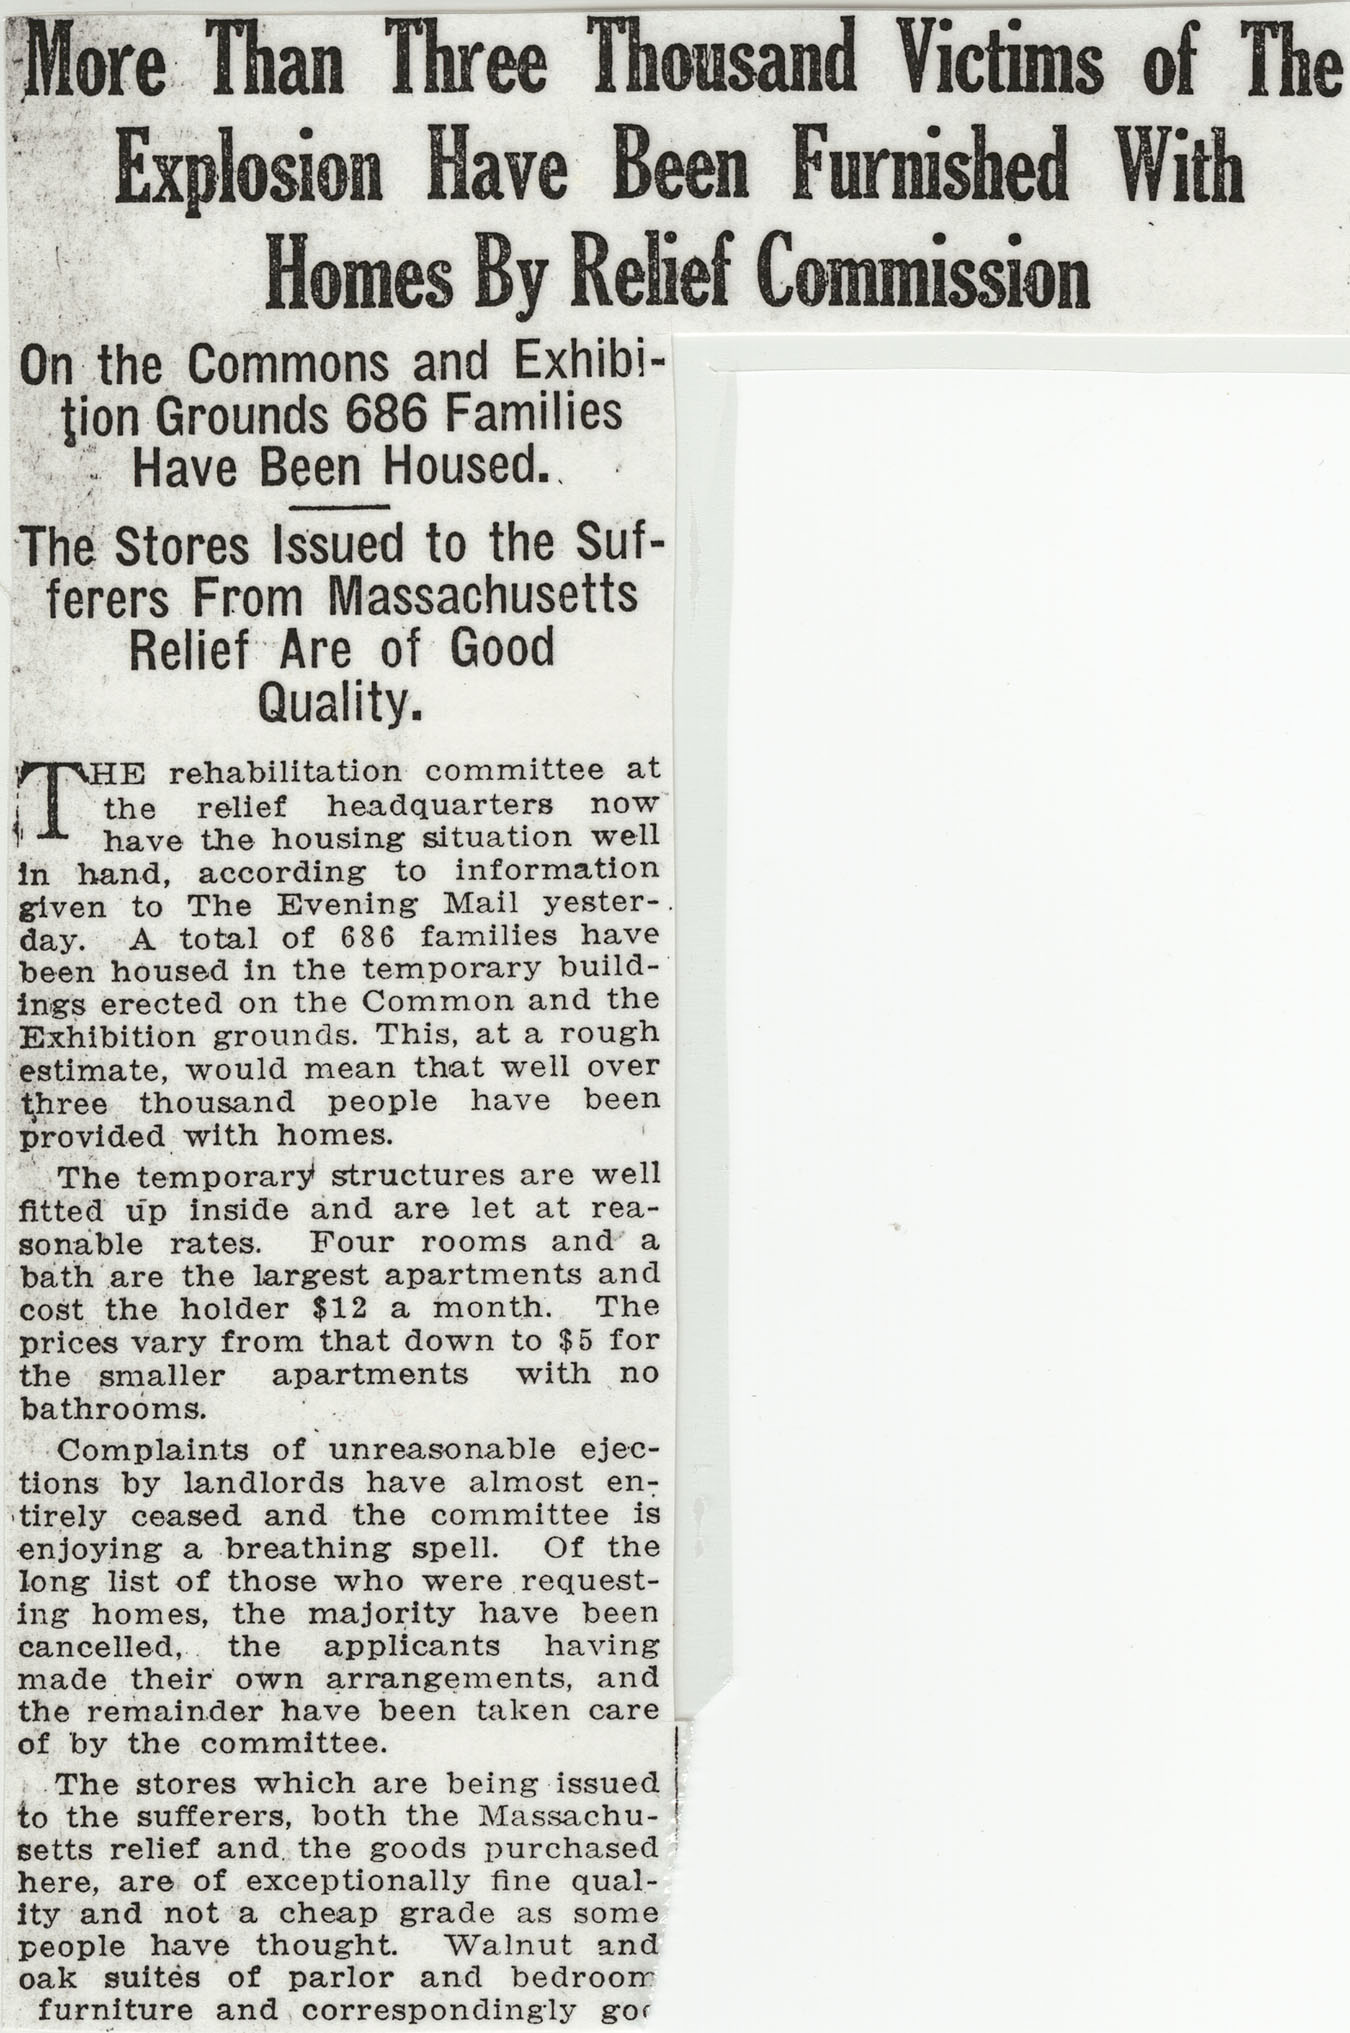 This article appeared in <i>The Evening Mail</i>, May 11, 1918, p.1